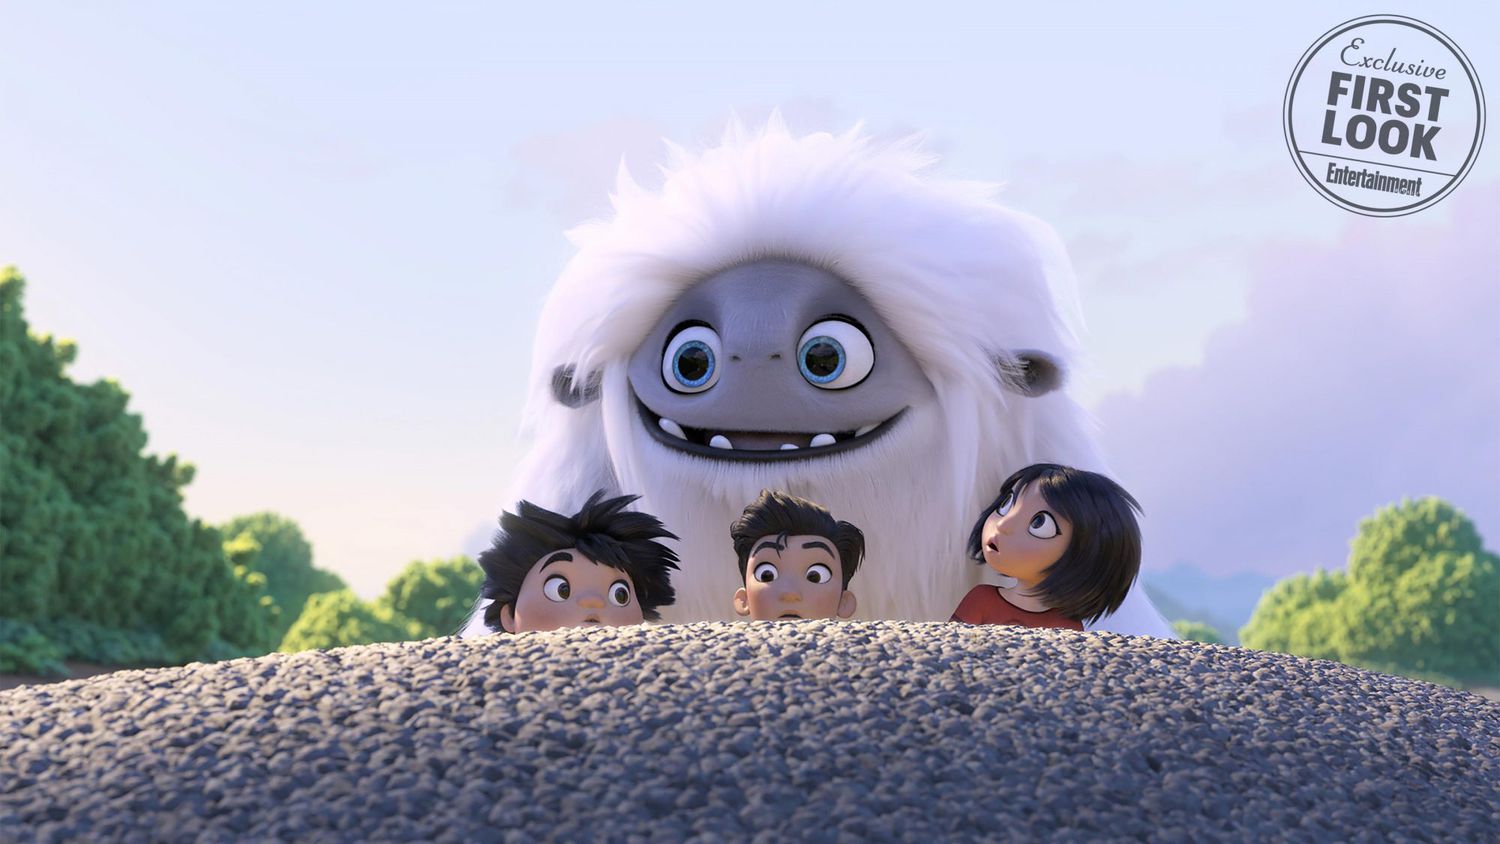 (from left) &ndash; Peng (Albert Tsai), Jin (Tenzing Norgay Trainor) and Yi (Chloe Bennet) with the Yeti, Everest, in DreamWorks Animation and Pearl Studio&rsquo;s Abominable, written and directed by Jill Culton.